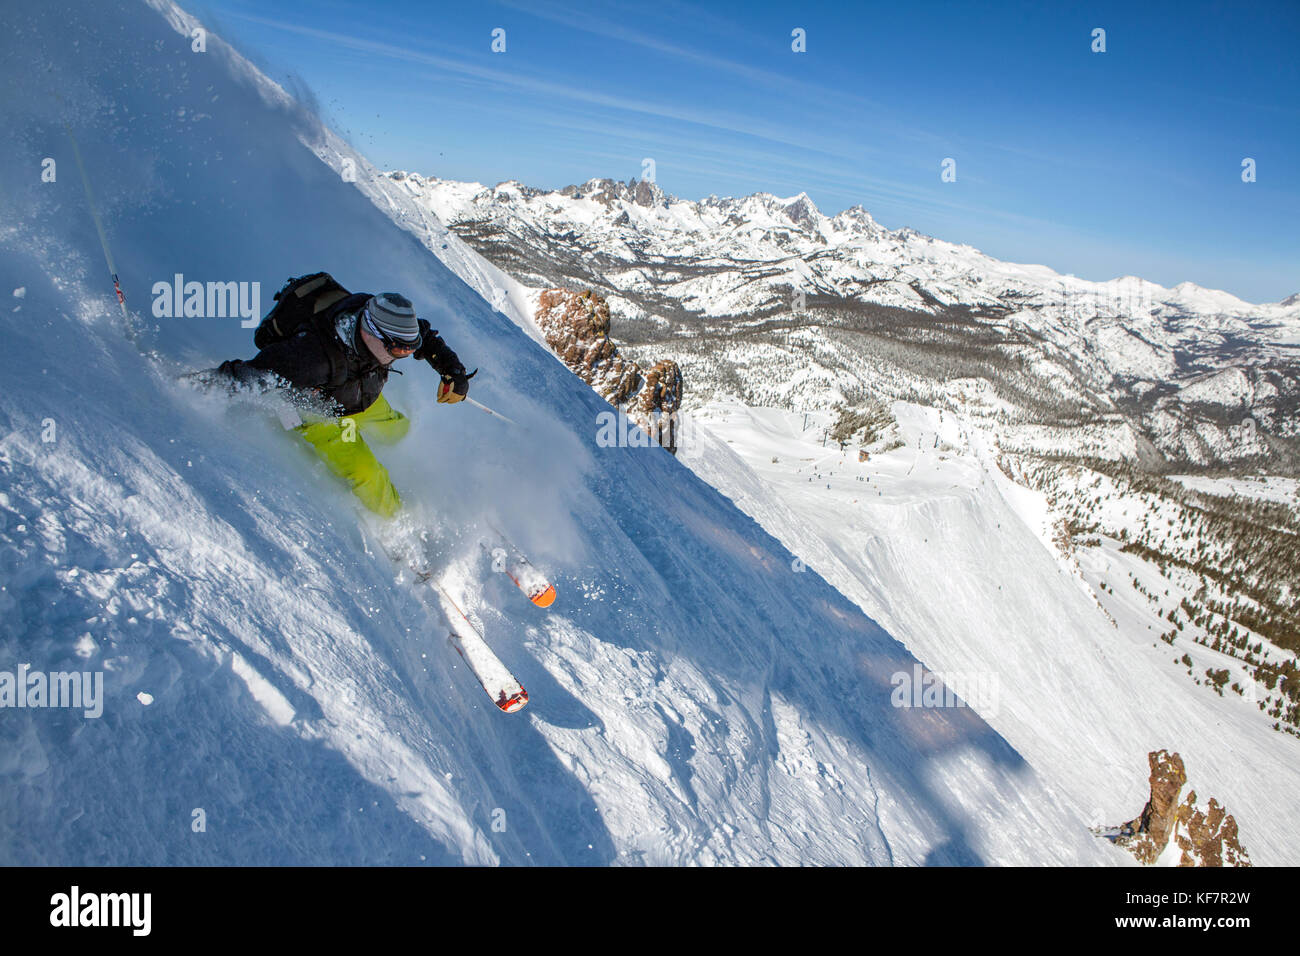 USA, California, Mammoth, a brightly colored skier carves his way down the run at Mammoth Ski Resort Stock Photo